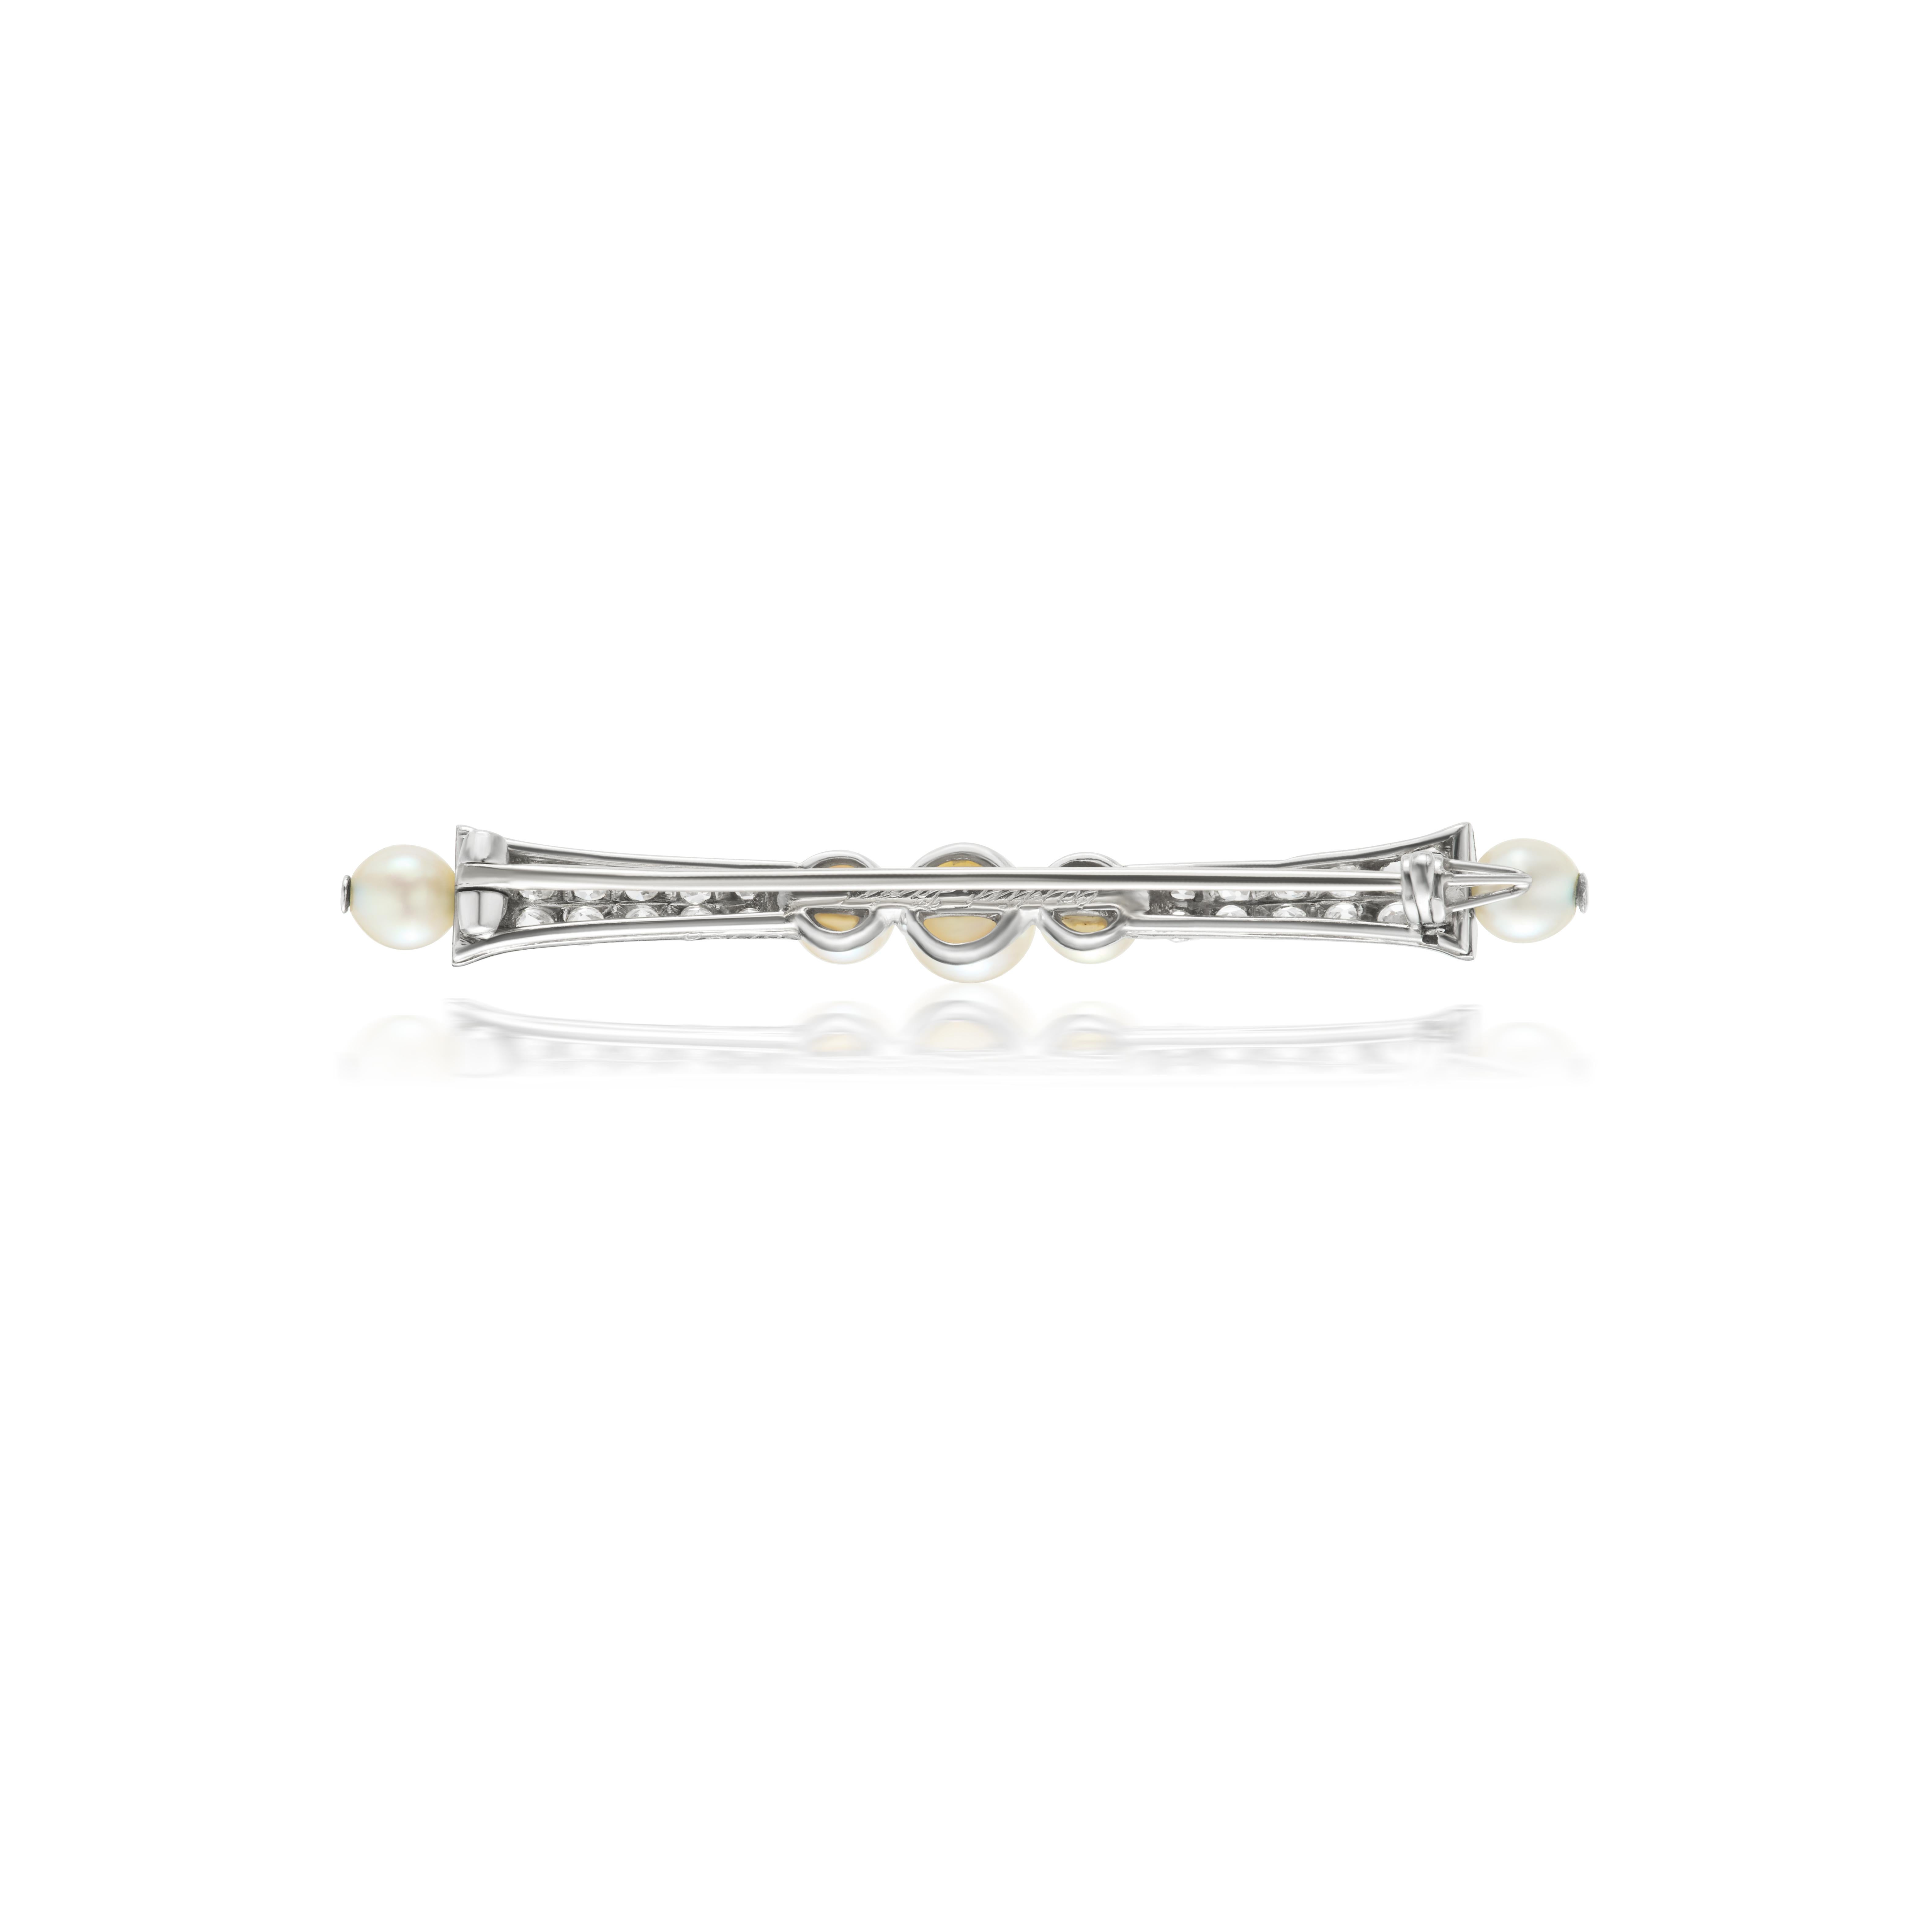 Sweet and delicate early Art Deco Cartier pin featuring 5 natural pearls and 26 old mine single cut diamonds. Measuring 2 inches long in fine condition. 

Signed 